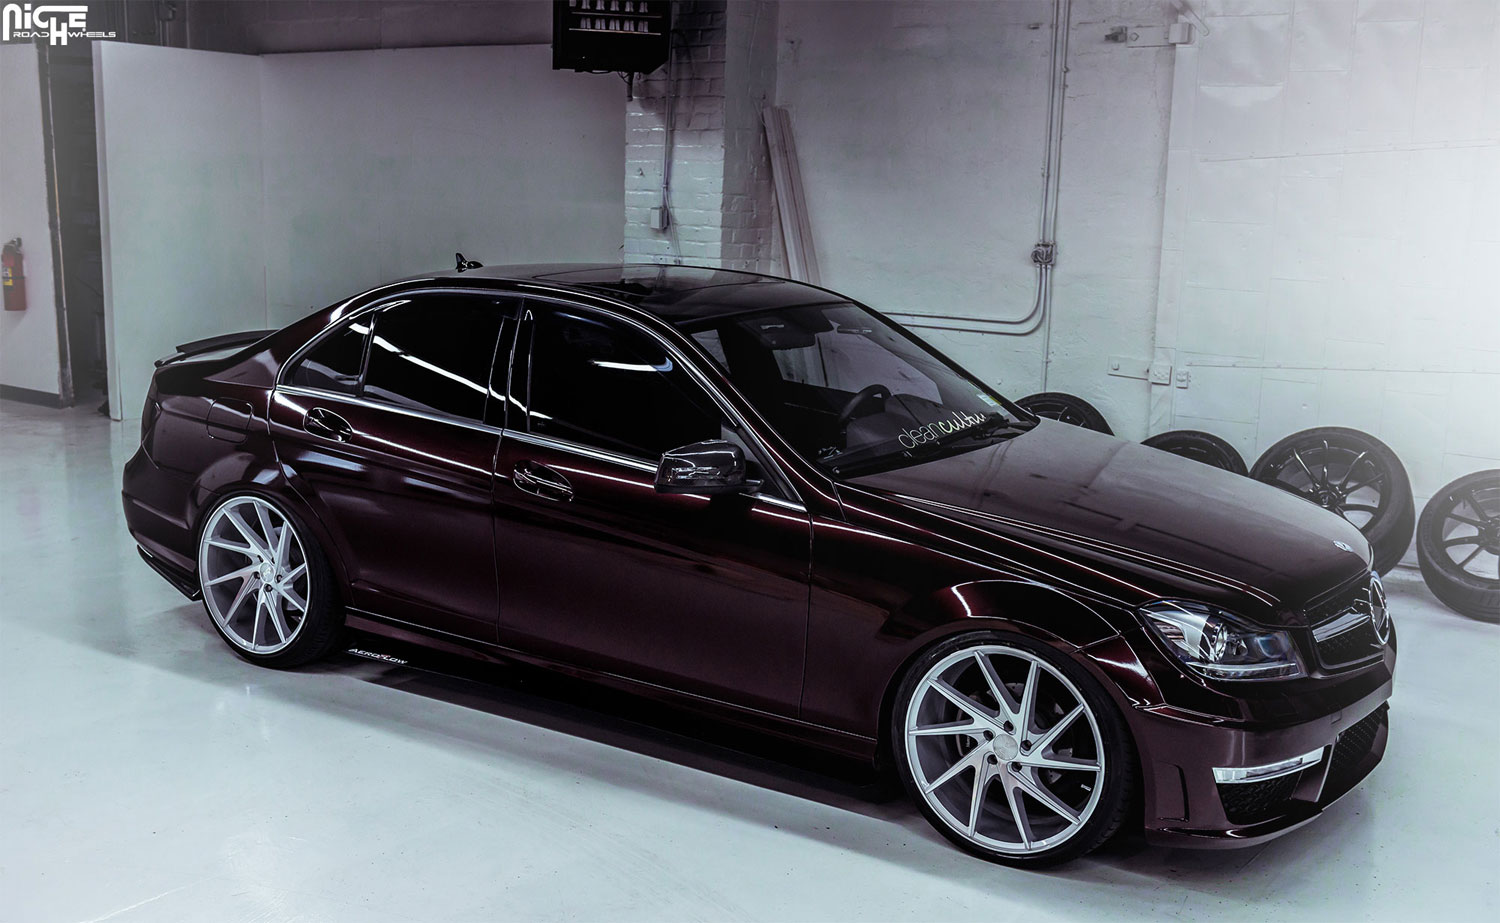 Mercedes C Class Wheels Custom Rim And Tire Packages